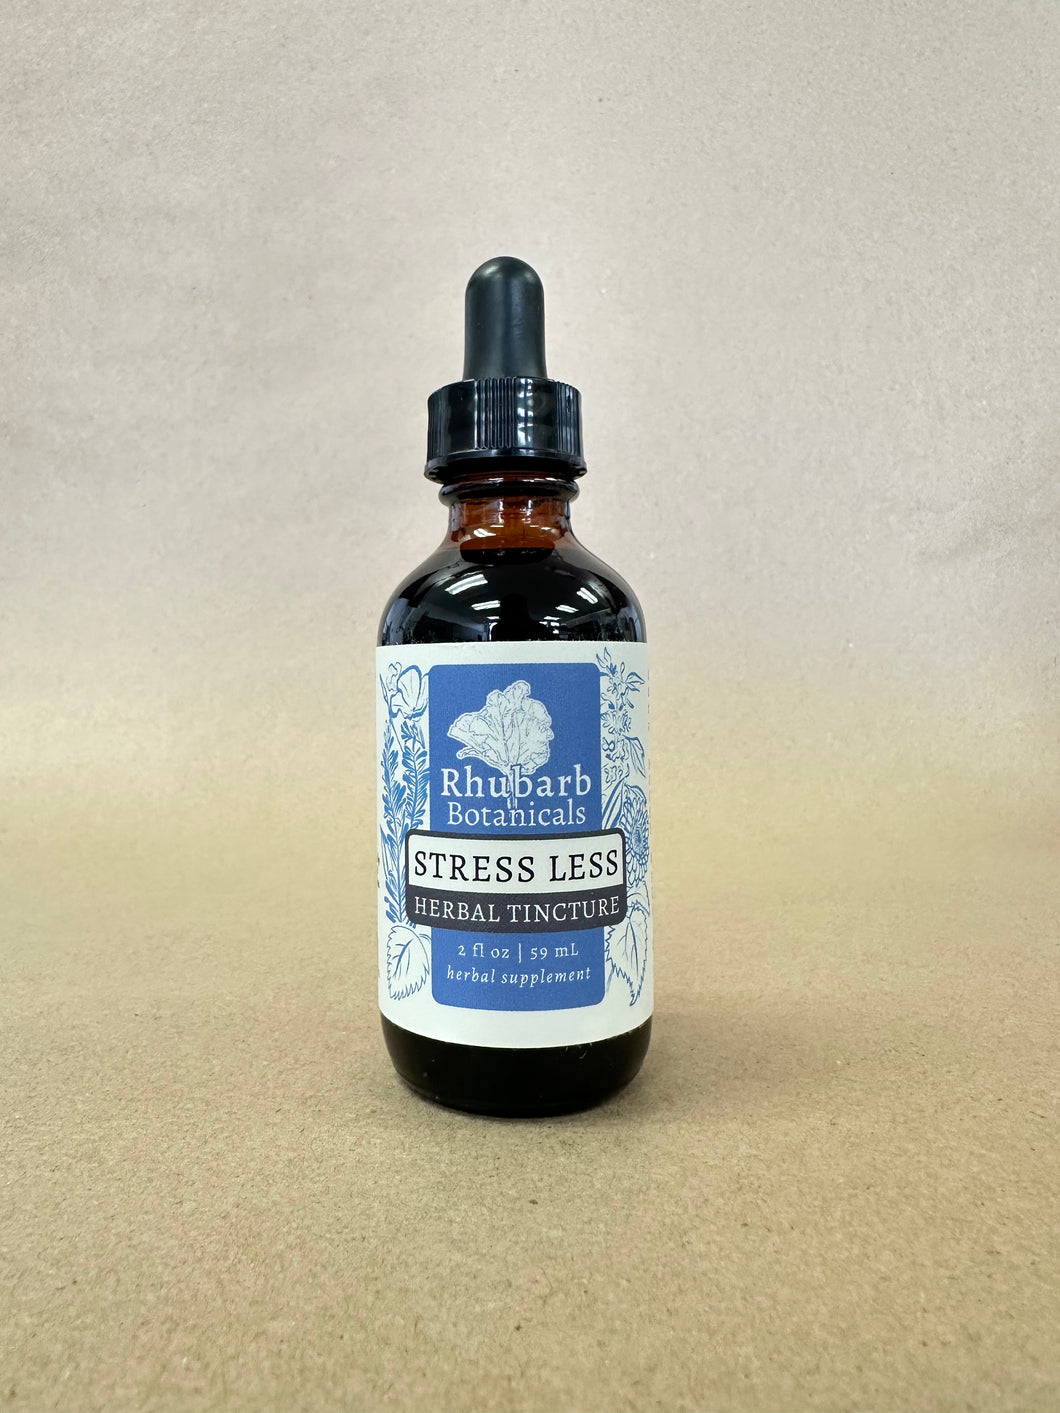 Stress Less Herbal Tincture